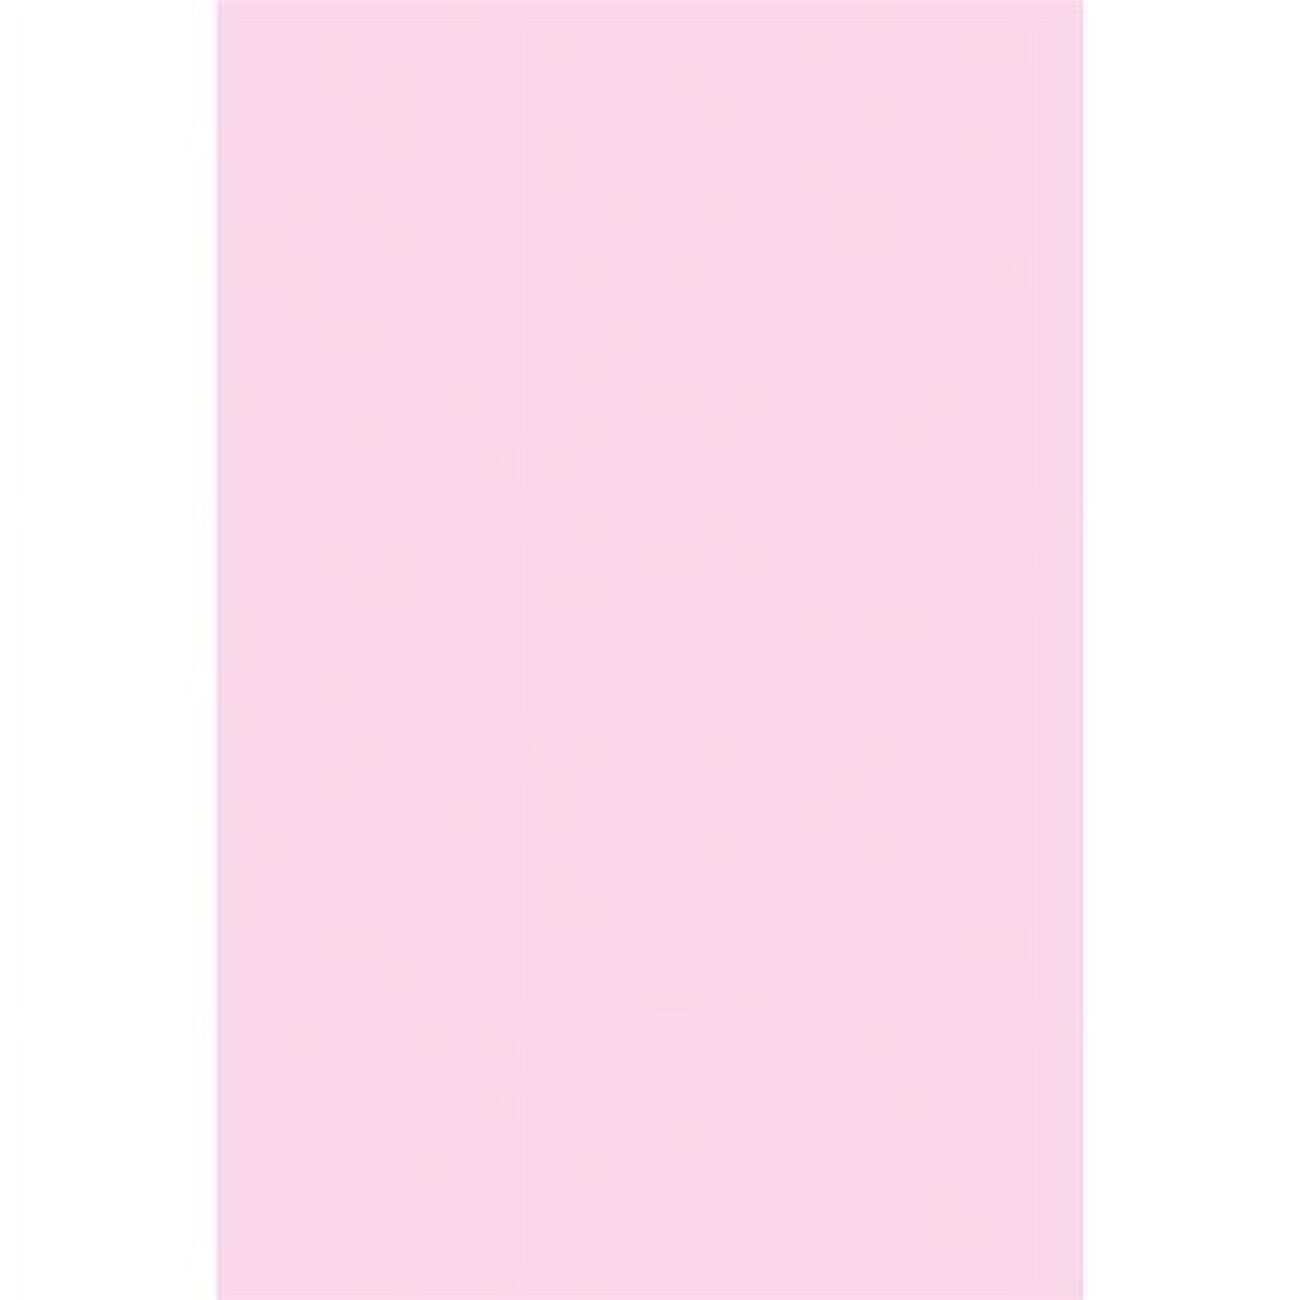 Spectra Deluxe Bleeding Tissue Paper, 20 x 30 Inches, Baby Pink, 24 Sheets